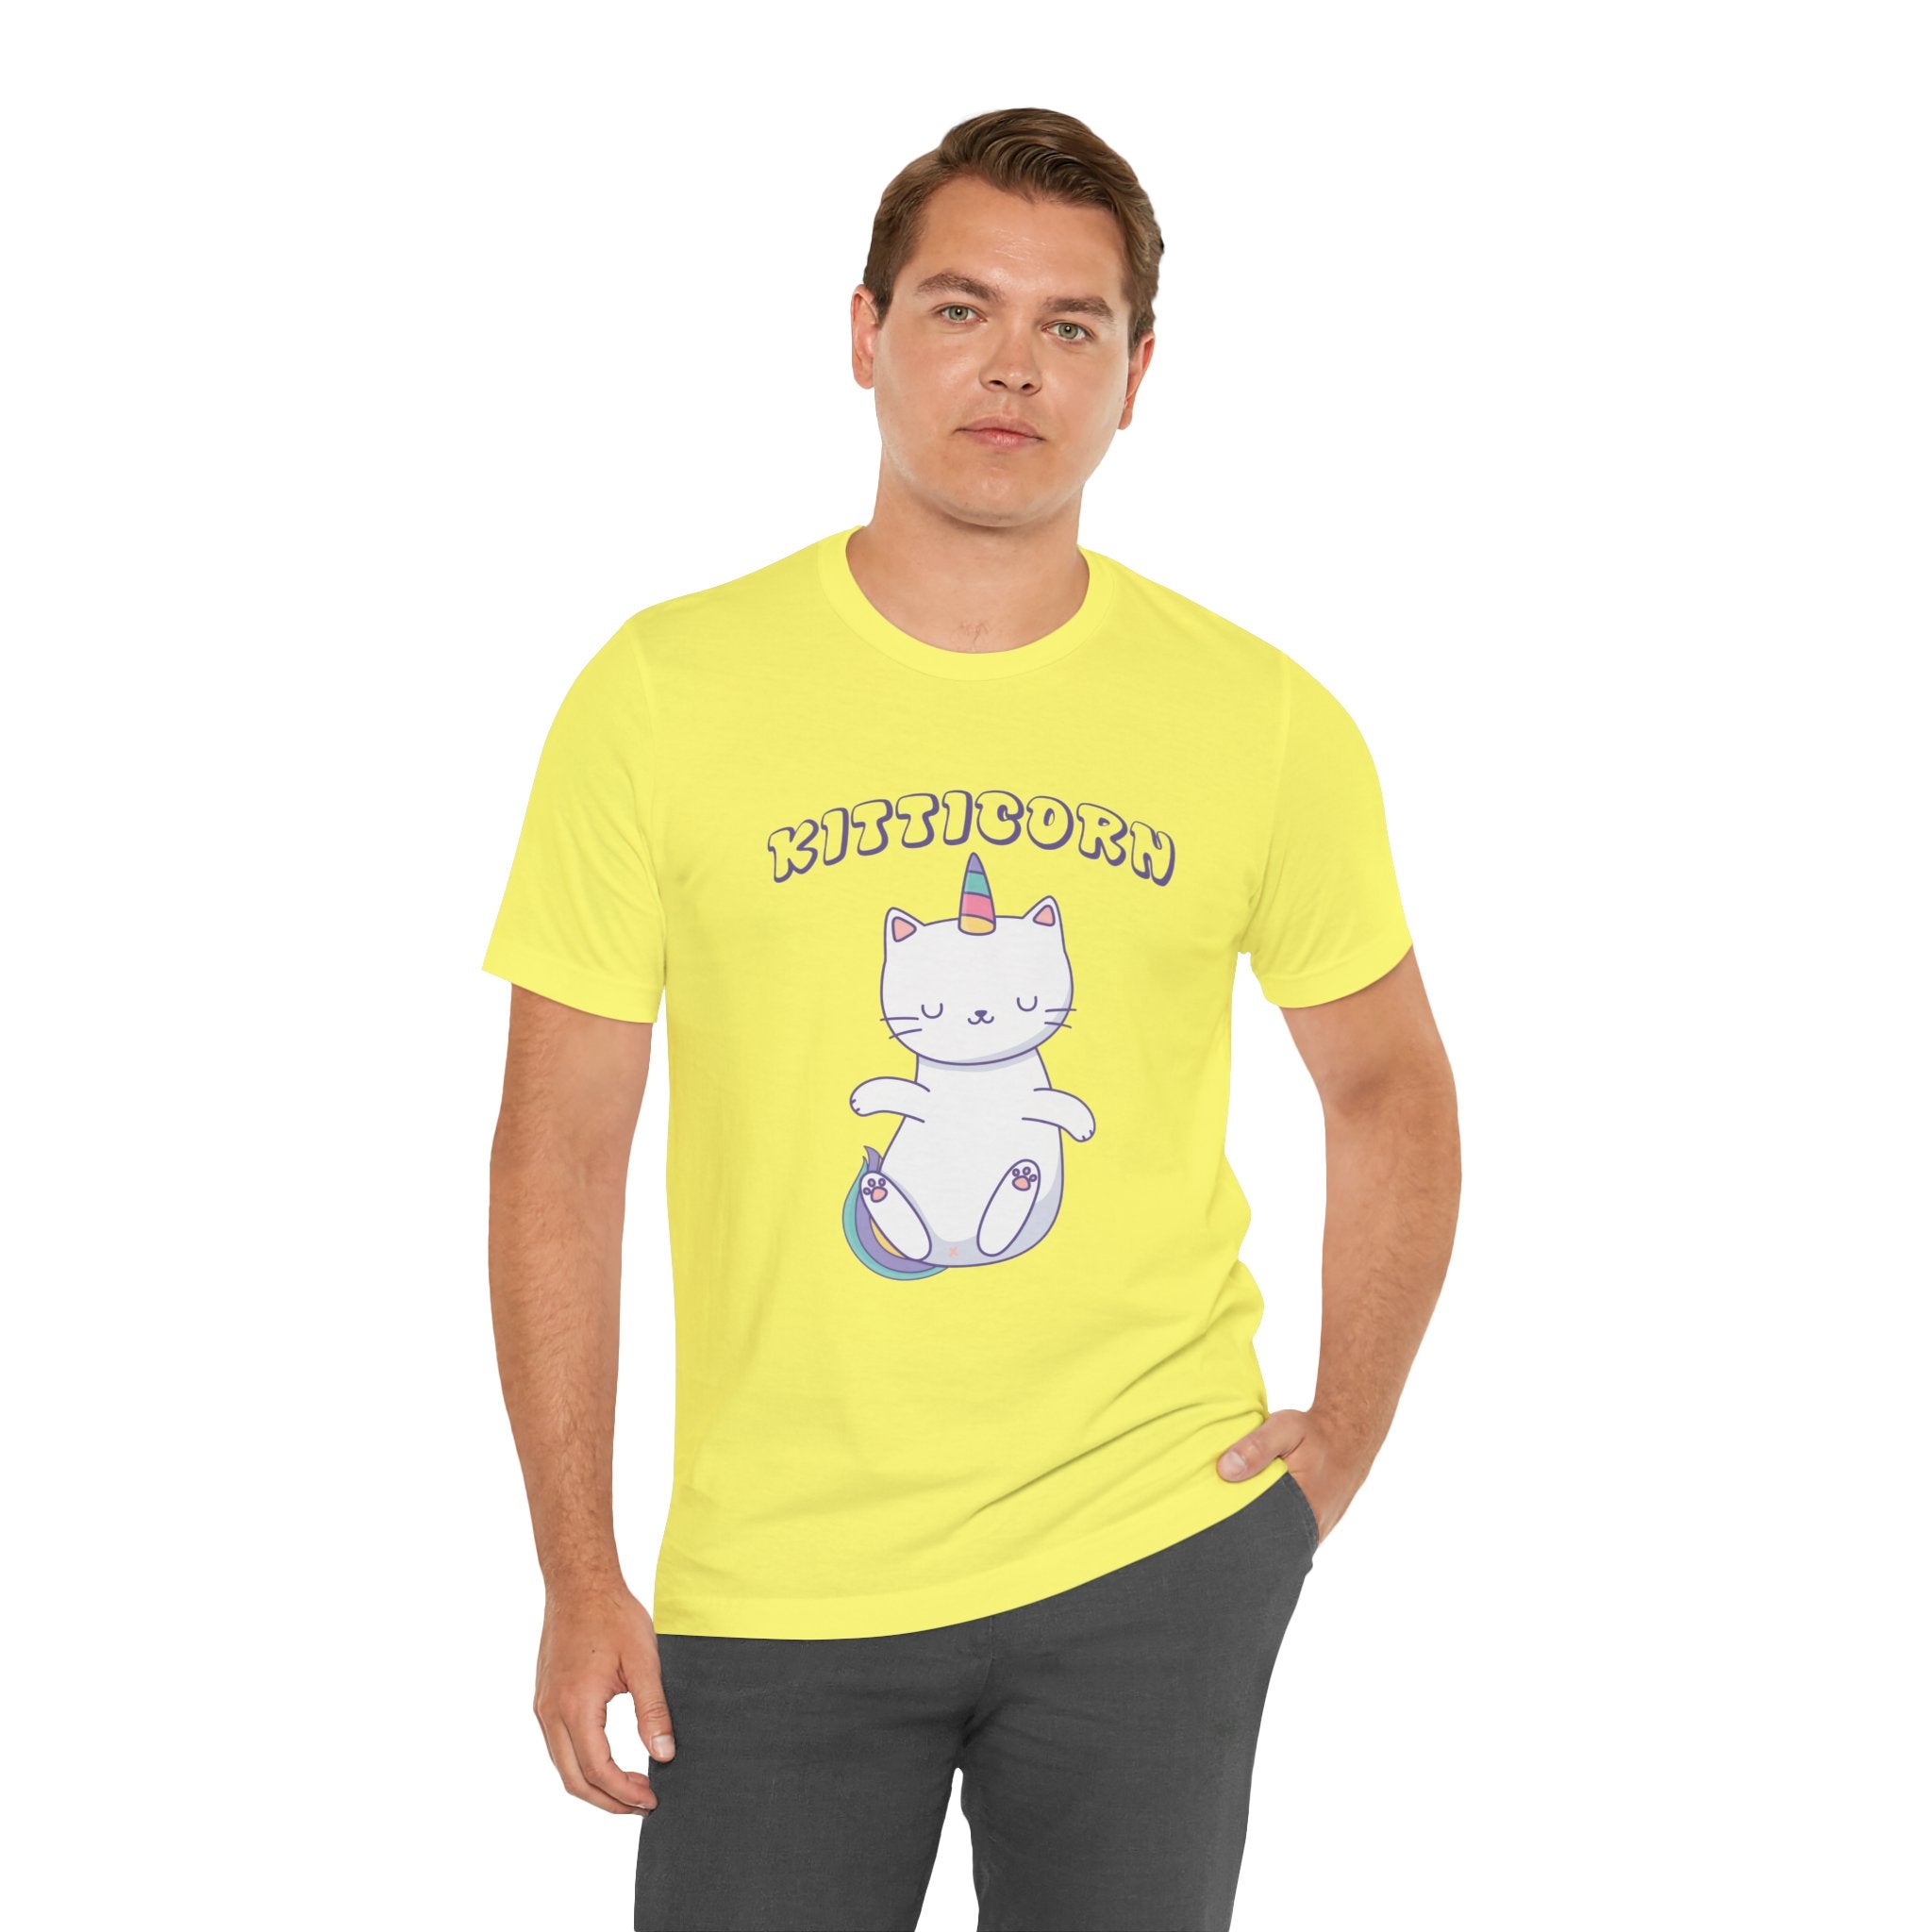 Man in a bright yellow unisex Kitticorn tee featuring a "kitticorn" graphic with quality print, standing against a plain white background.